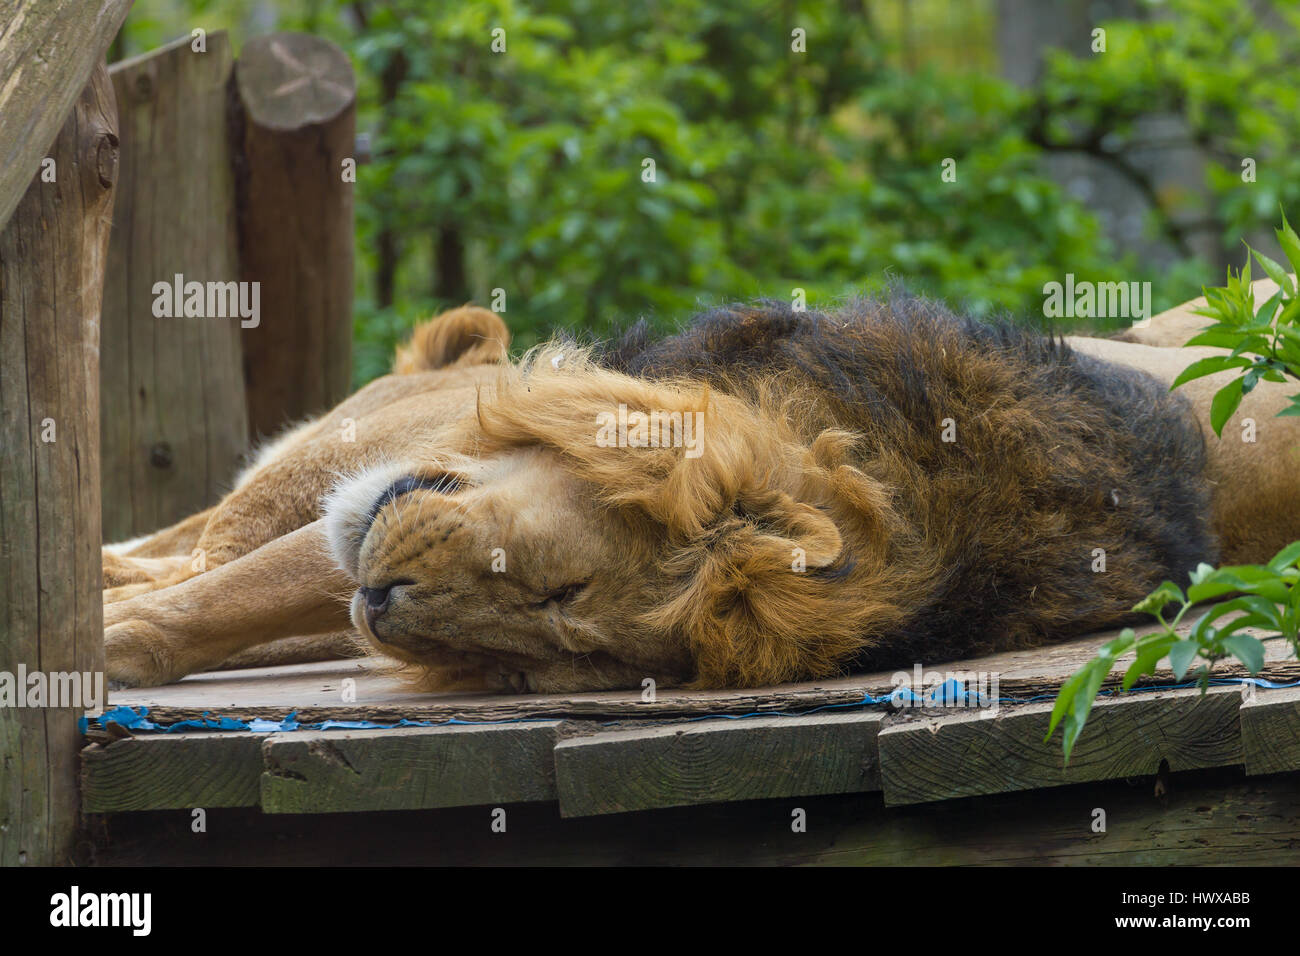 Lovely lion resting  relax outdoors animal photo Stock Photo